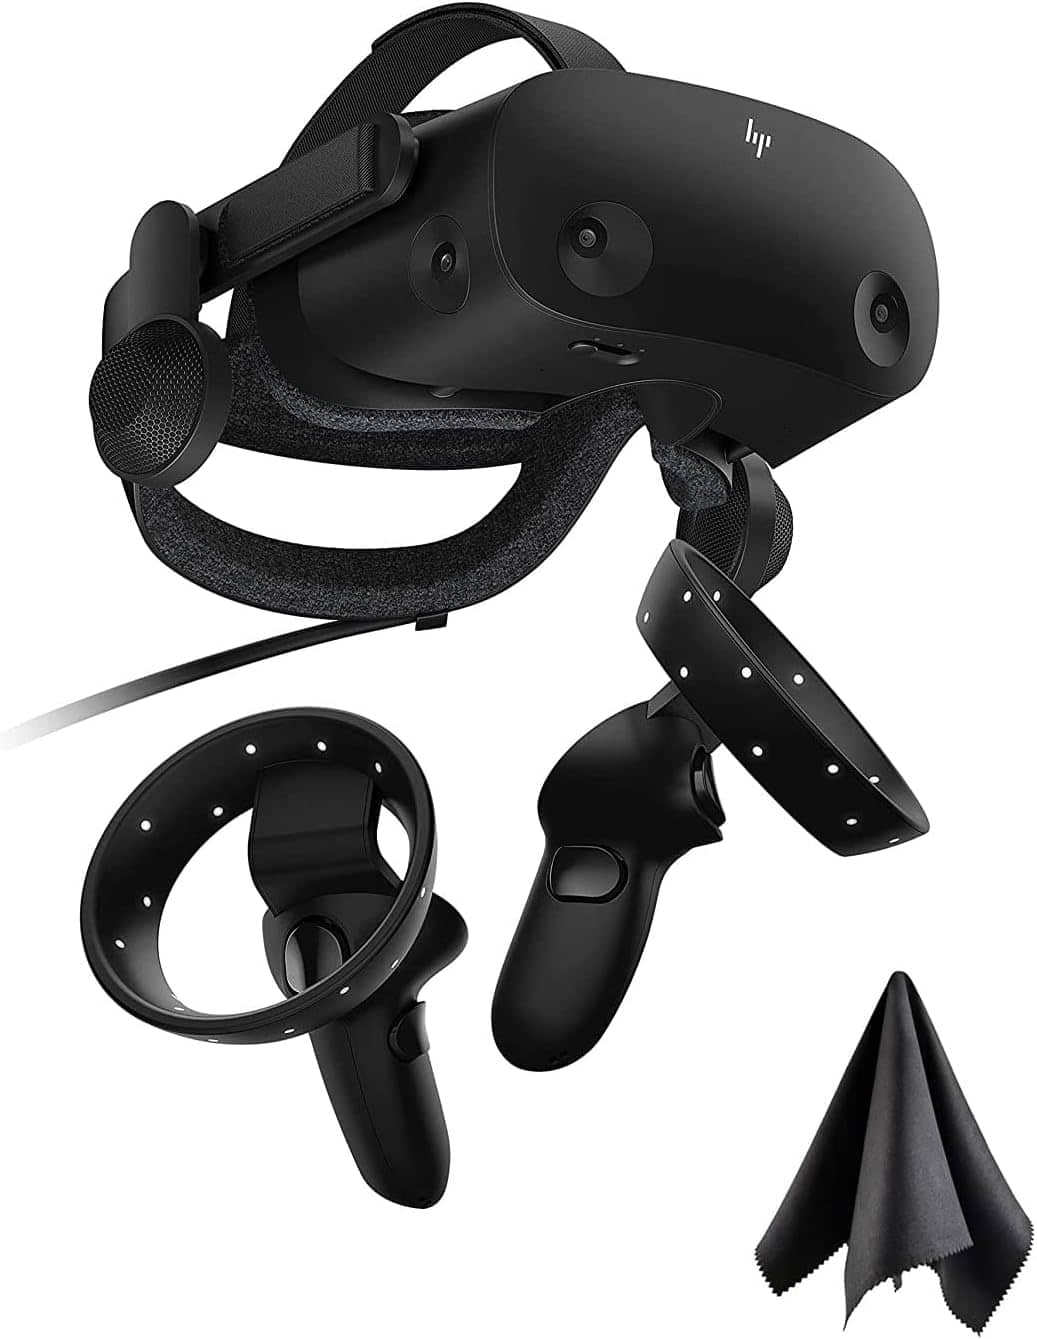 The HP Reverb G2 is a vr headset with a controller attached to it.